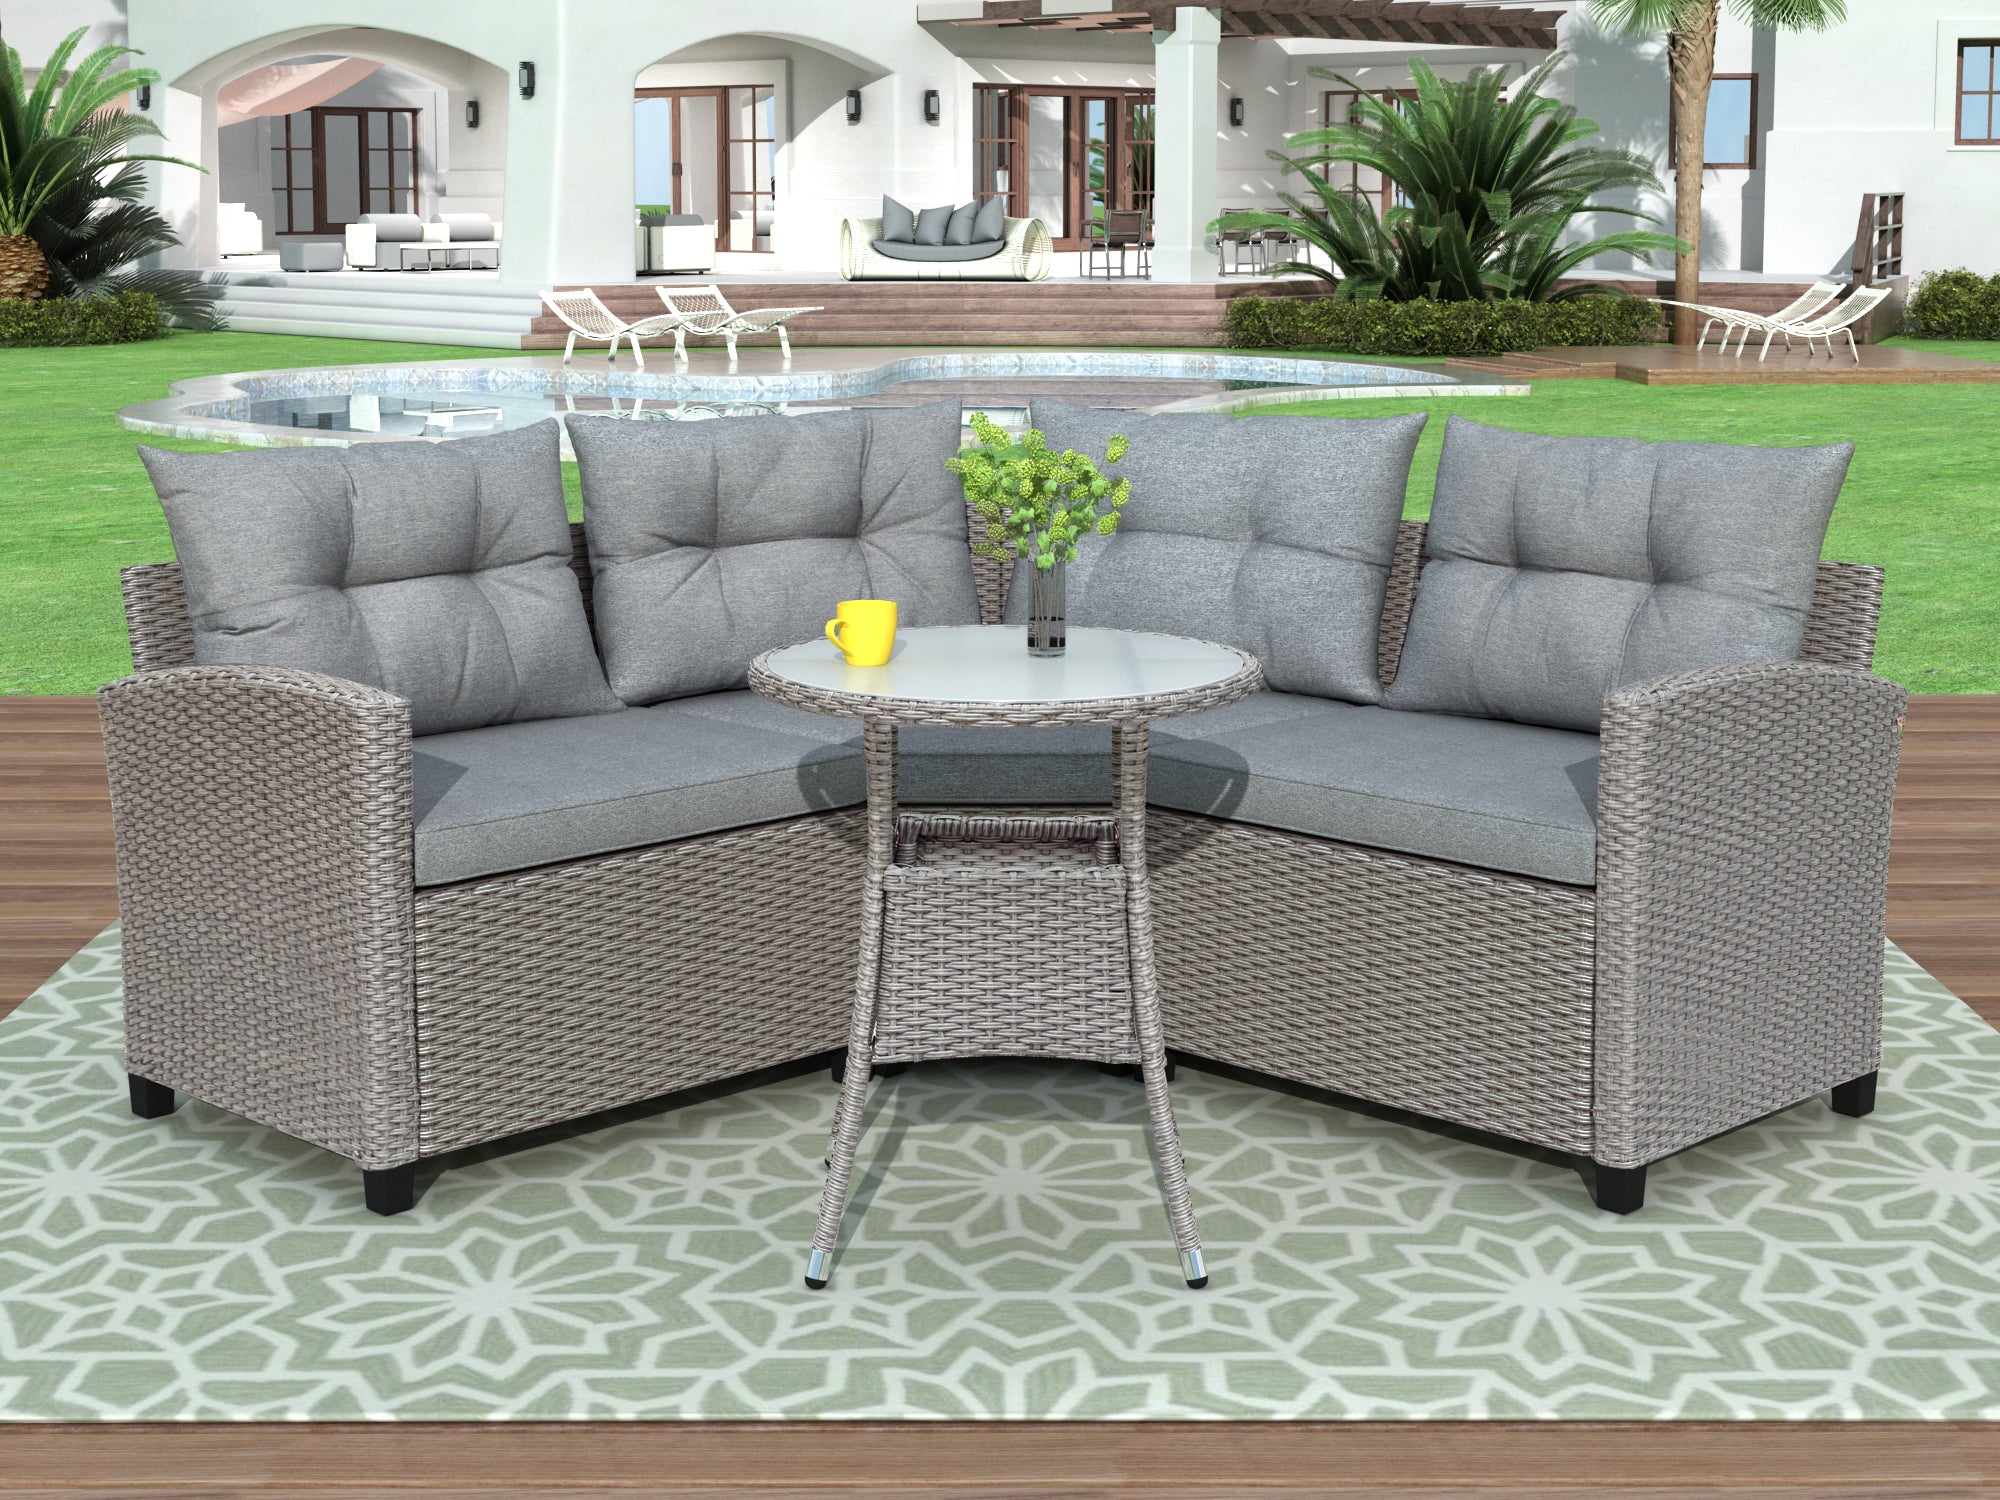 Grey 4 Piece Resin Wicker Patio Furniture Set with Round Table